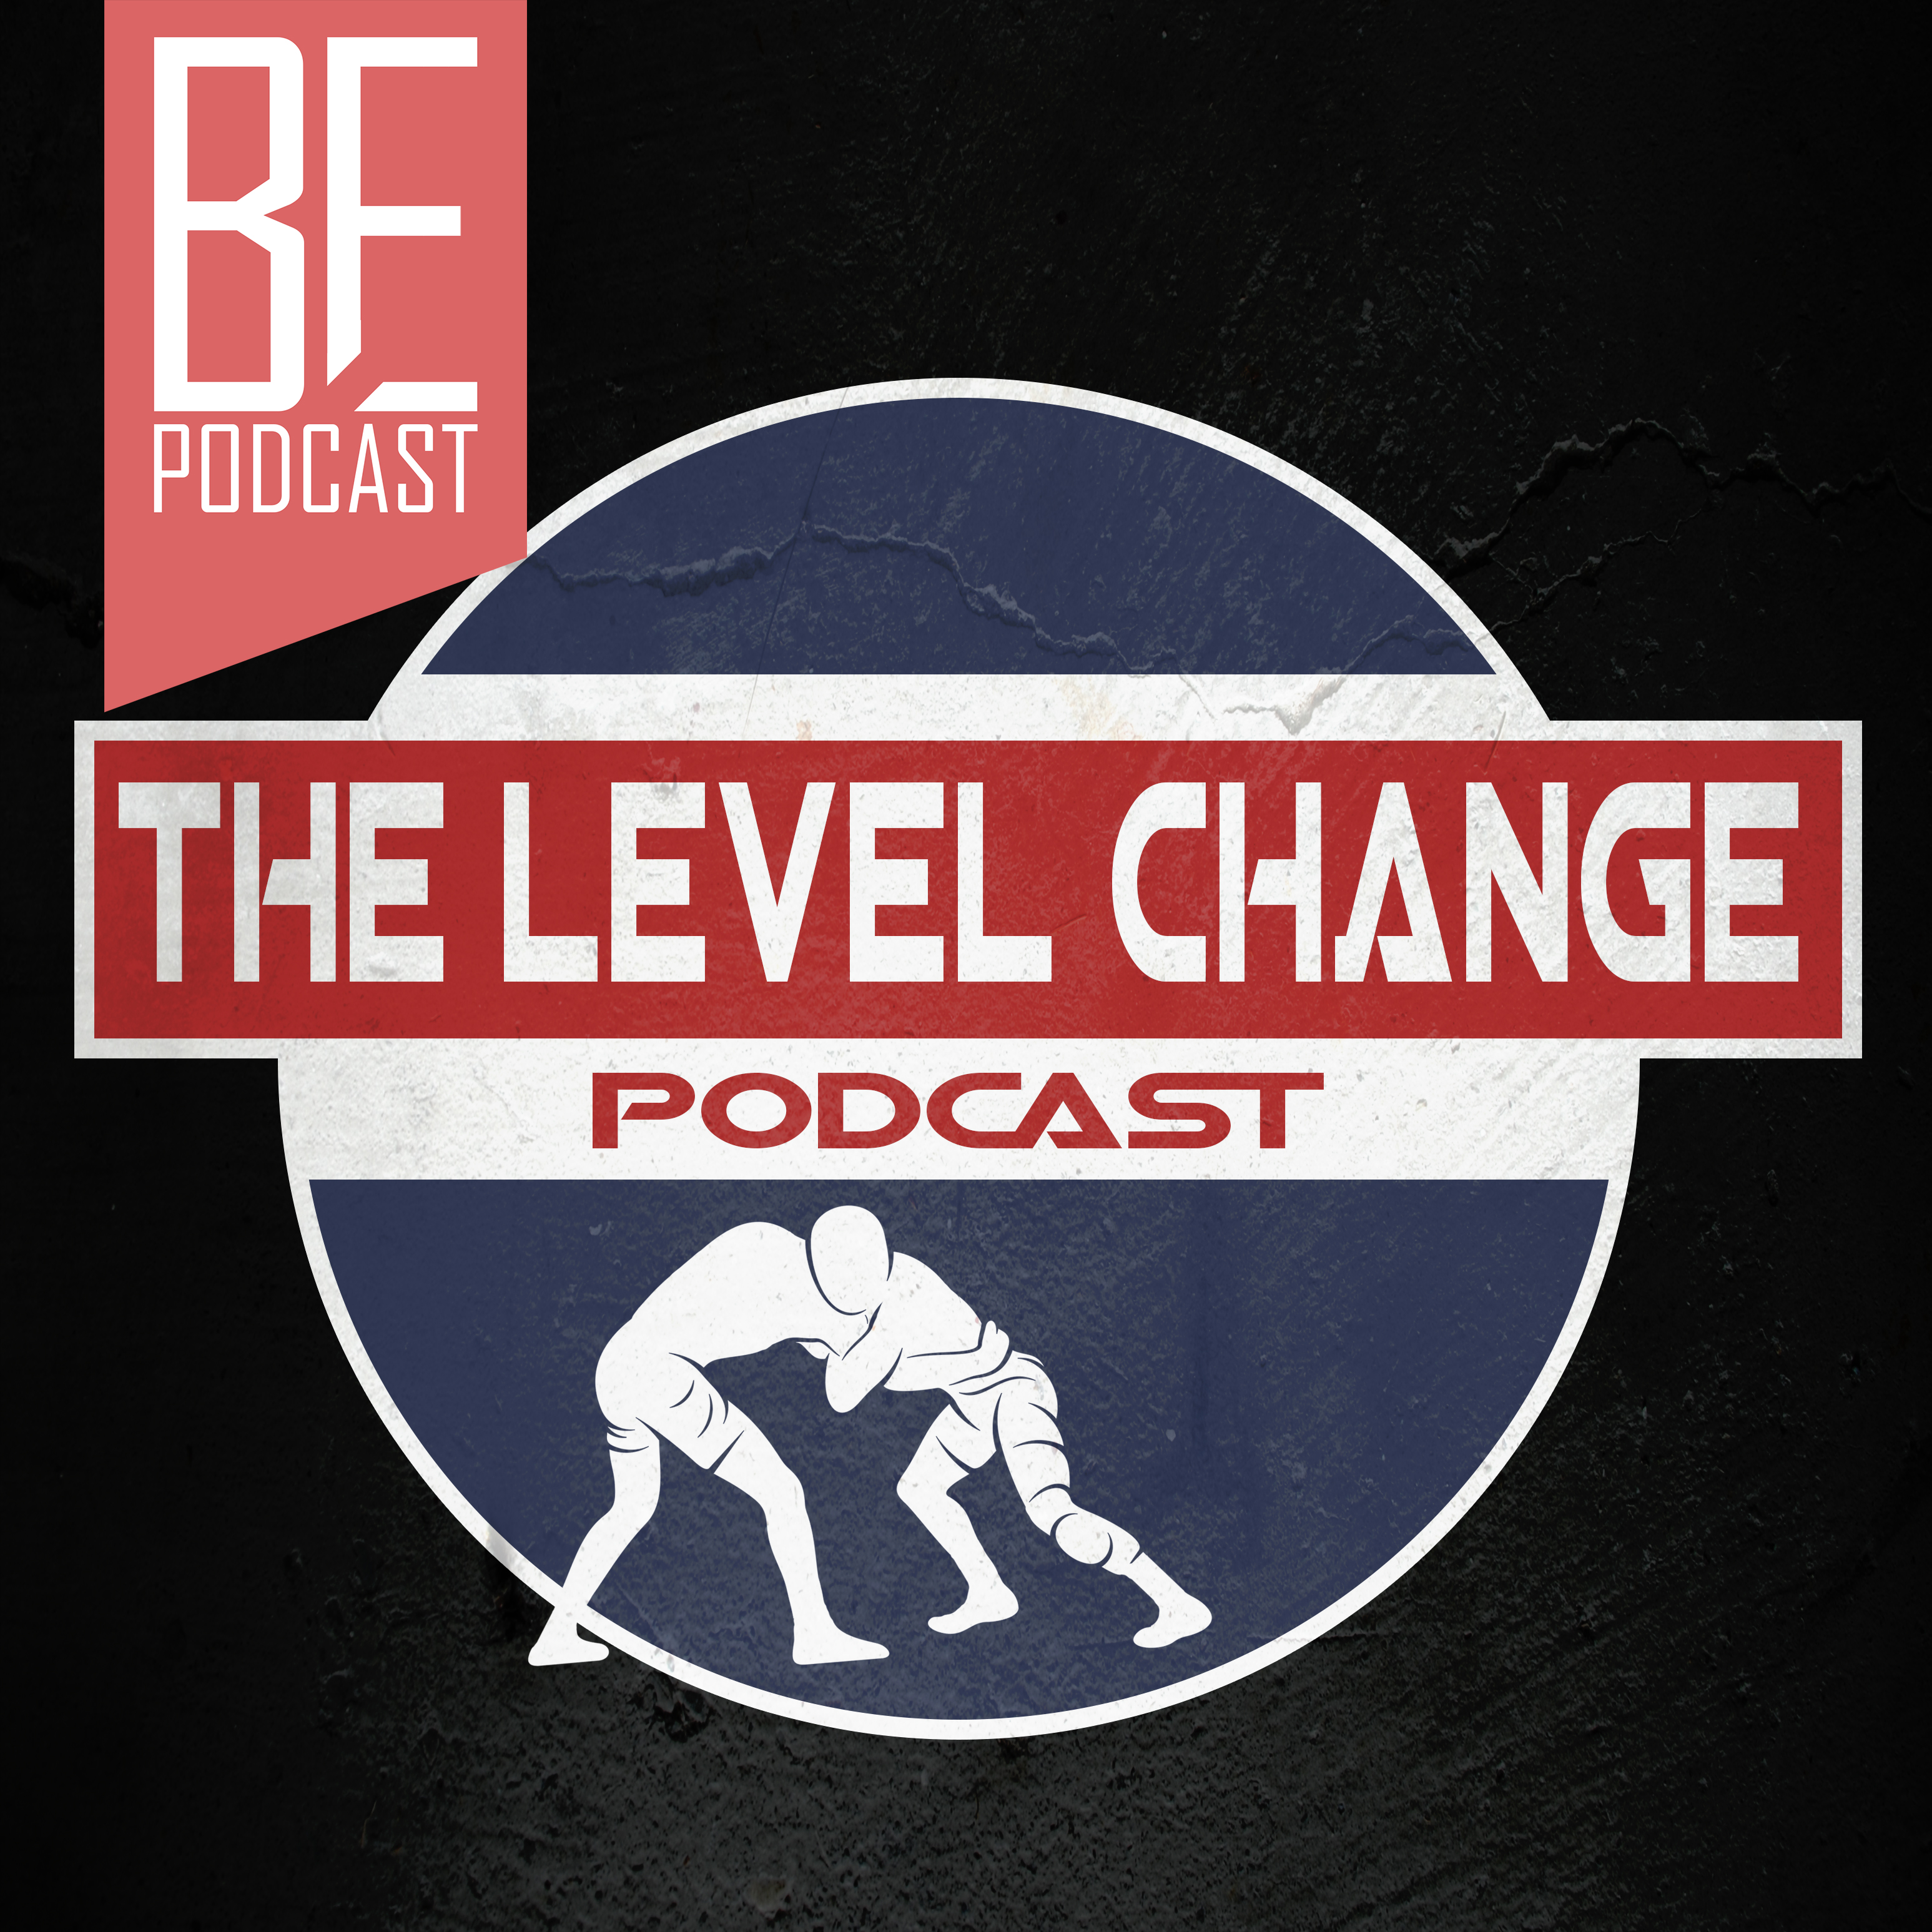 Level Change Podcast, UFC Podcast, MMA Podcast, TLC, UFC Review, UFC Preview, UFC and MMA News, Boxing, Stephie Haynes, Victor Rodriguez, Bloody Elbow Podcast Substack,